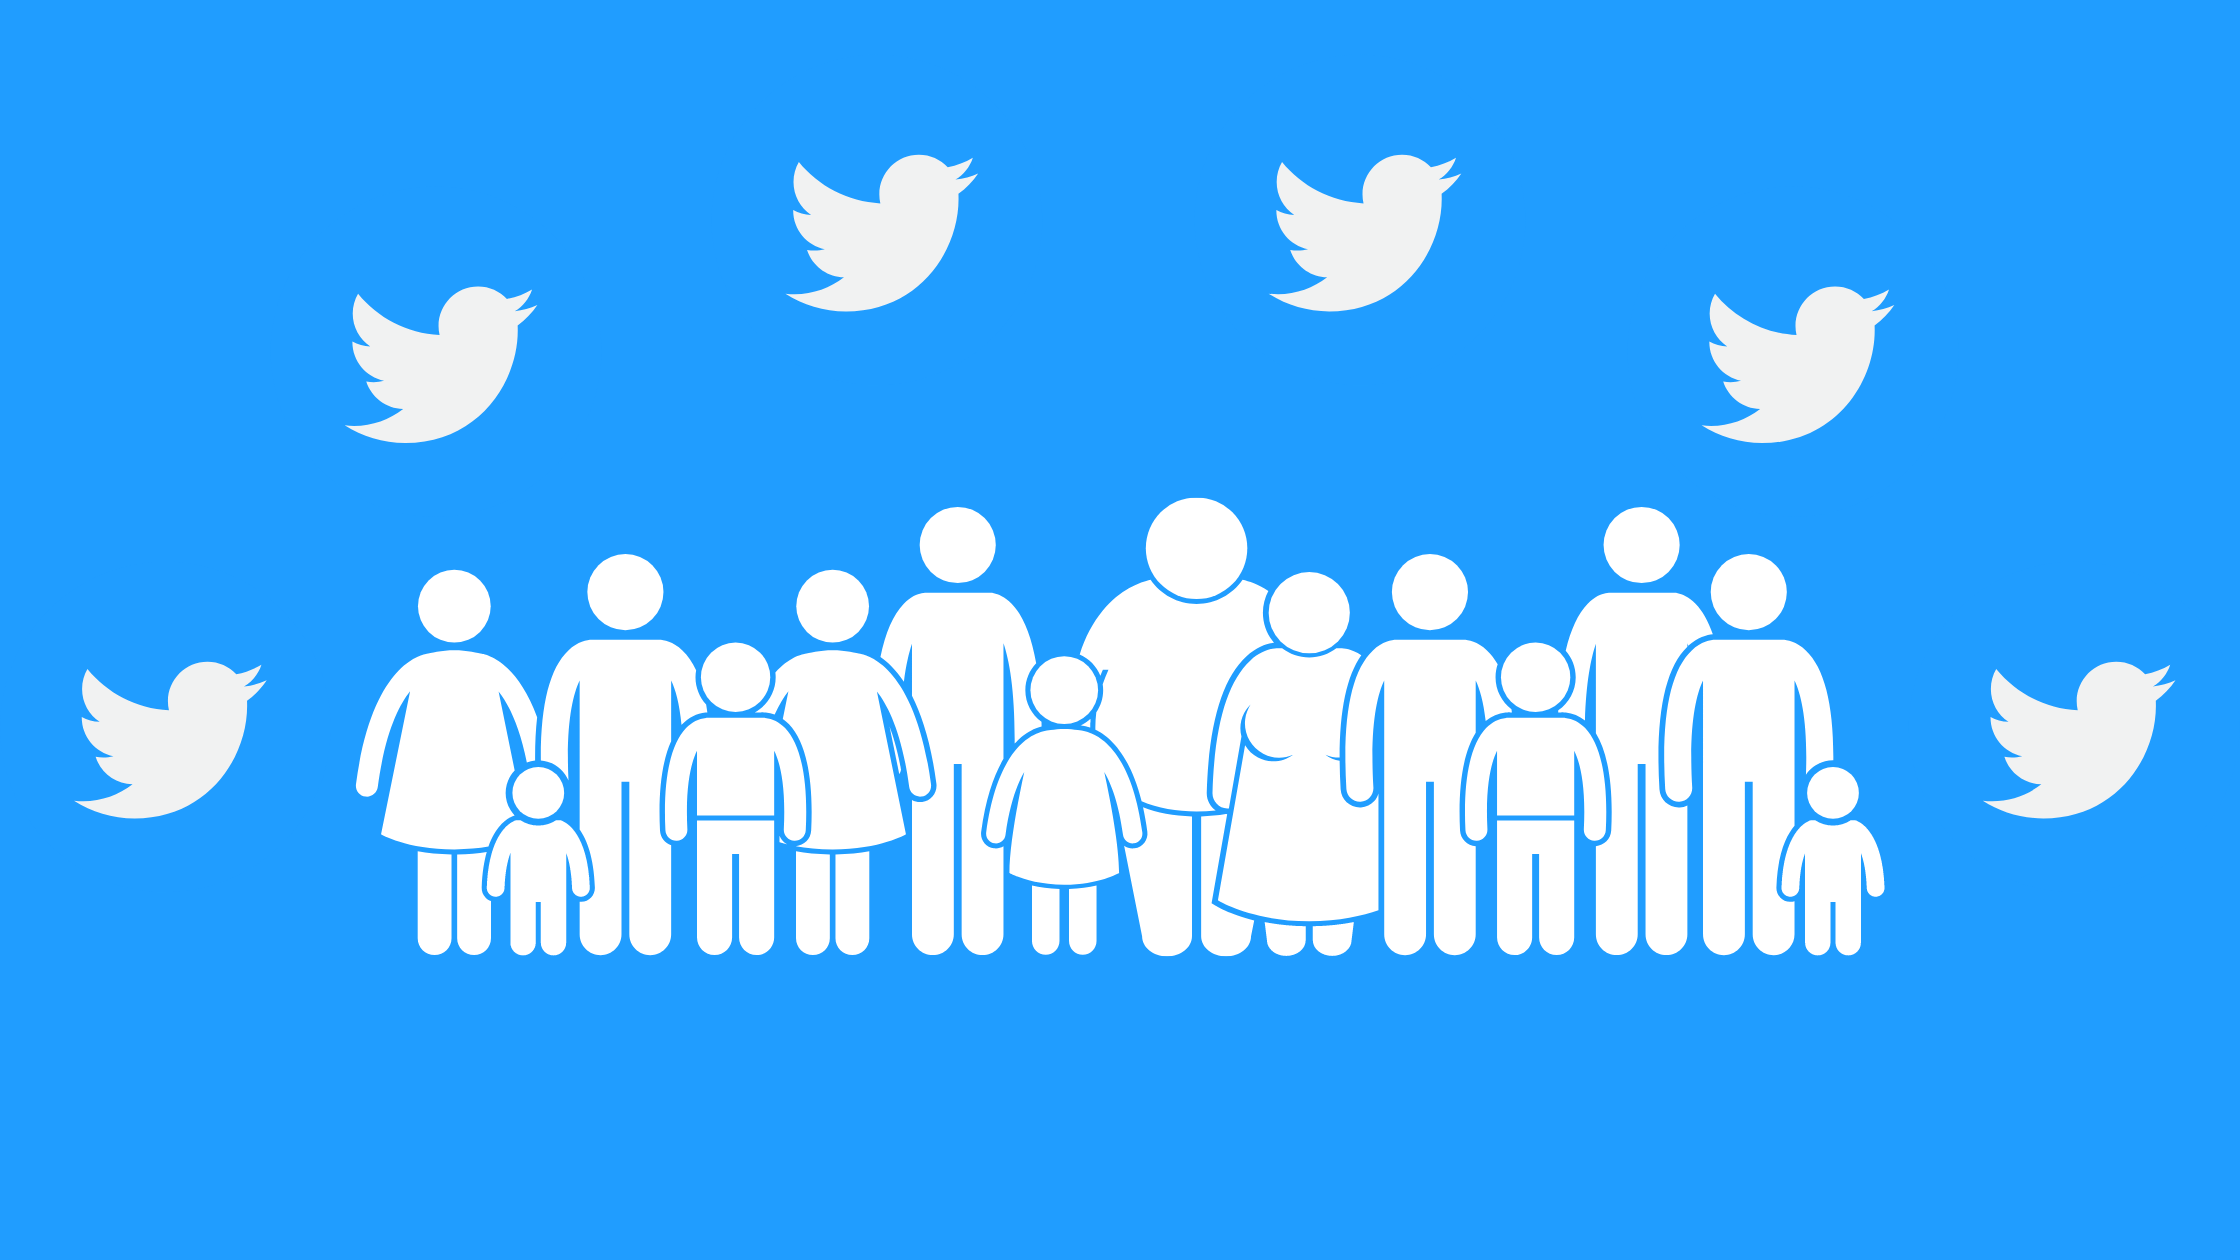 Twitter announces Communities feature, but can it help publishers?